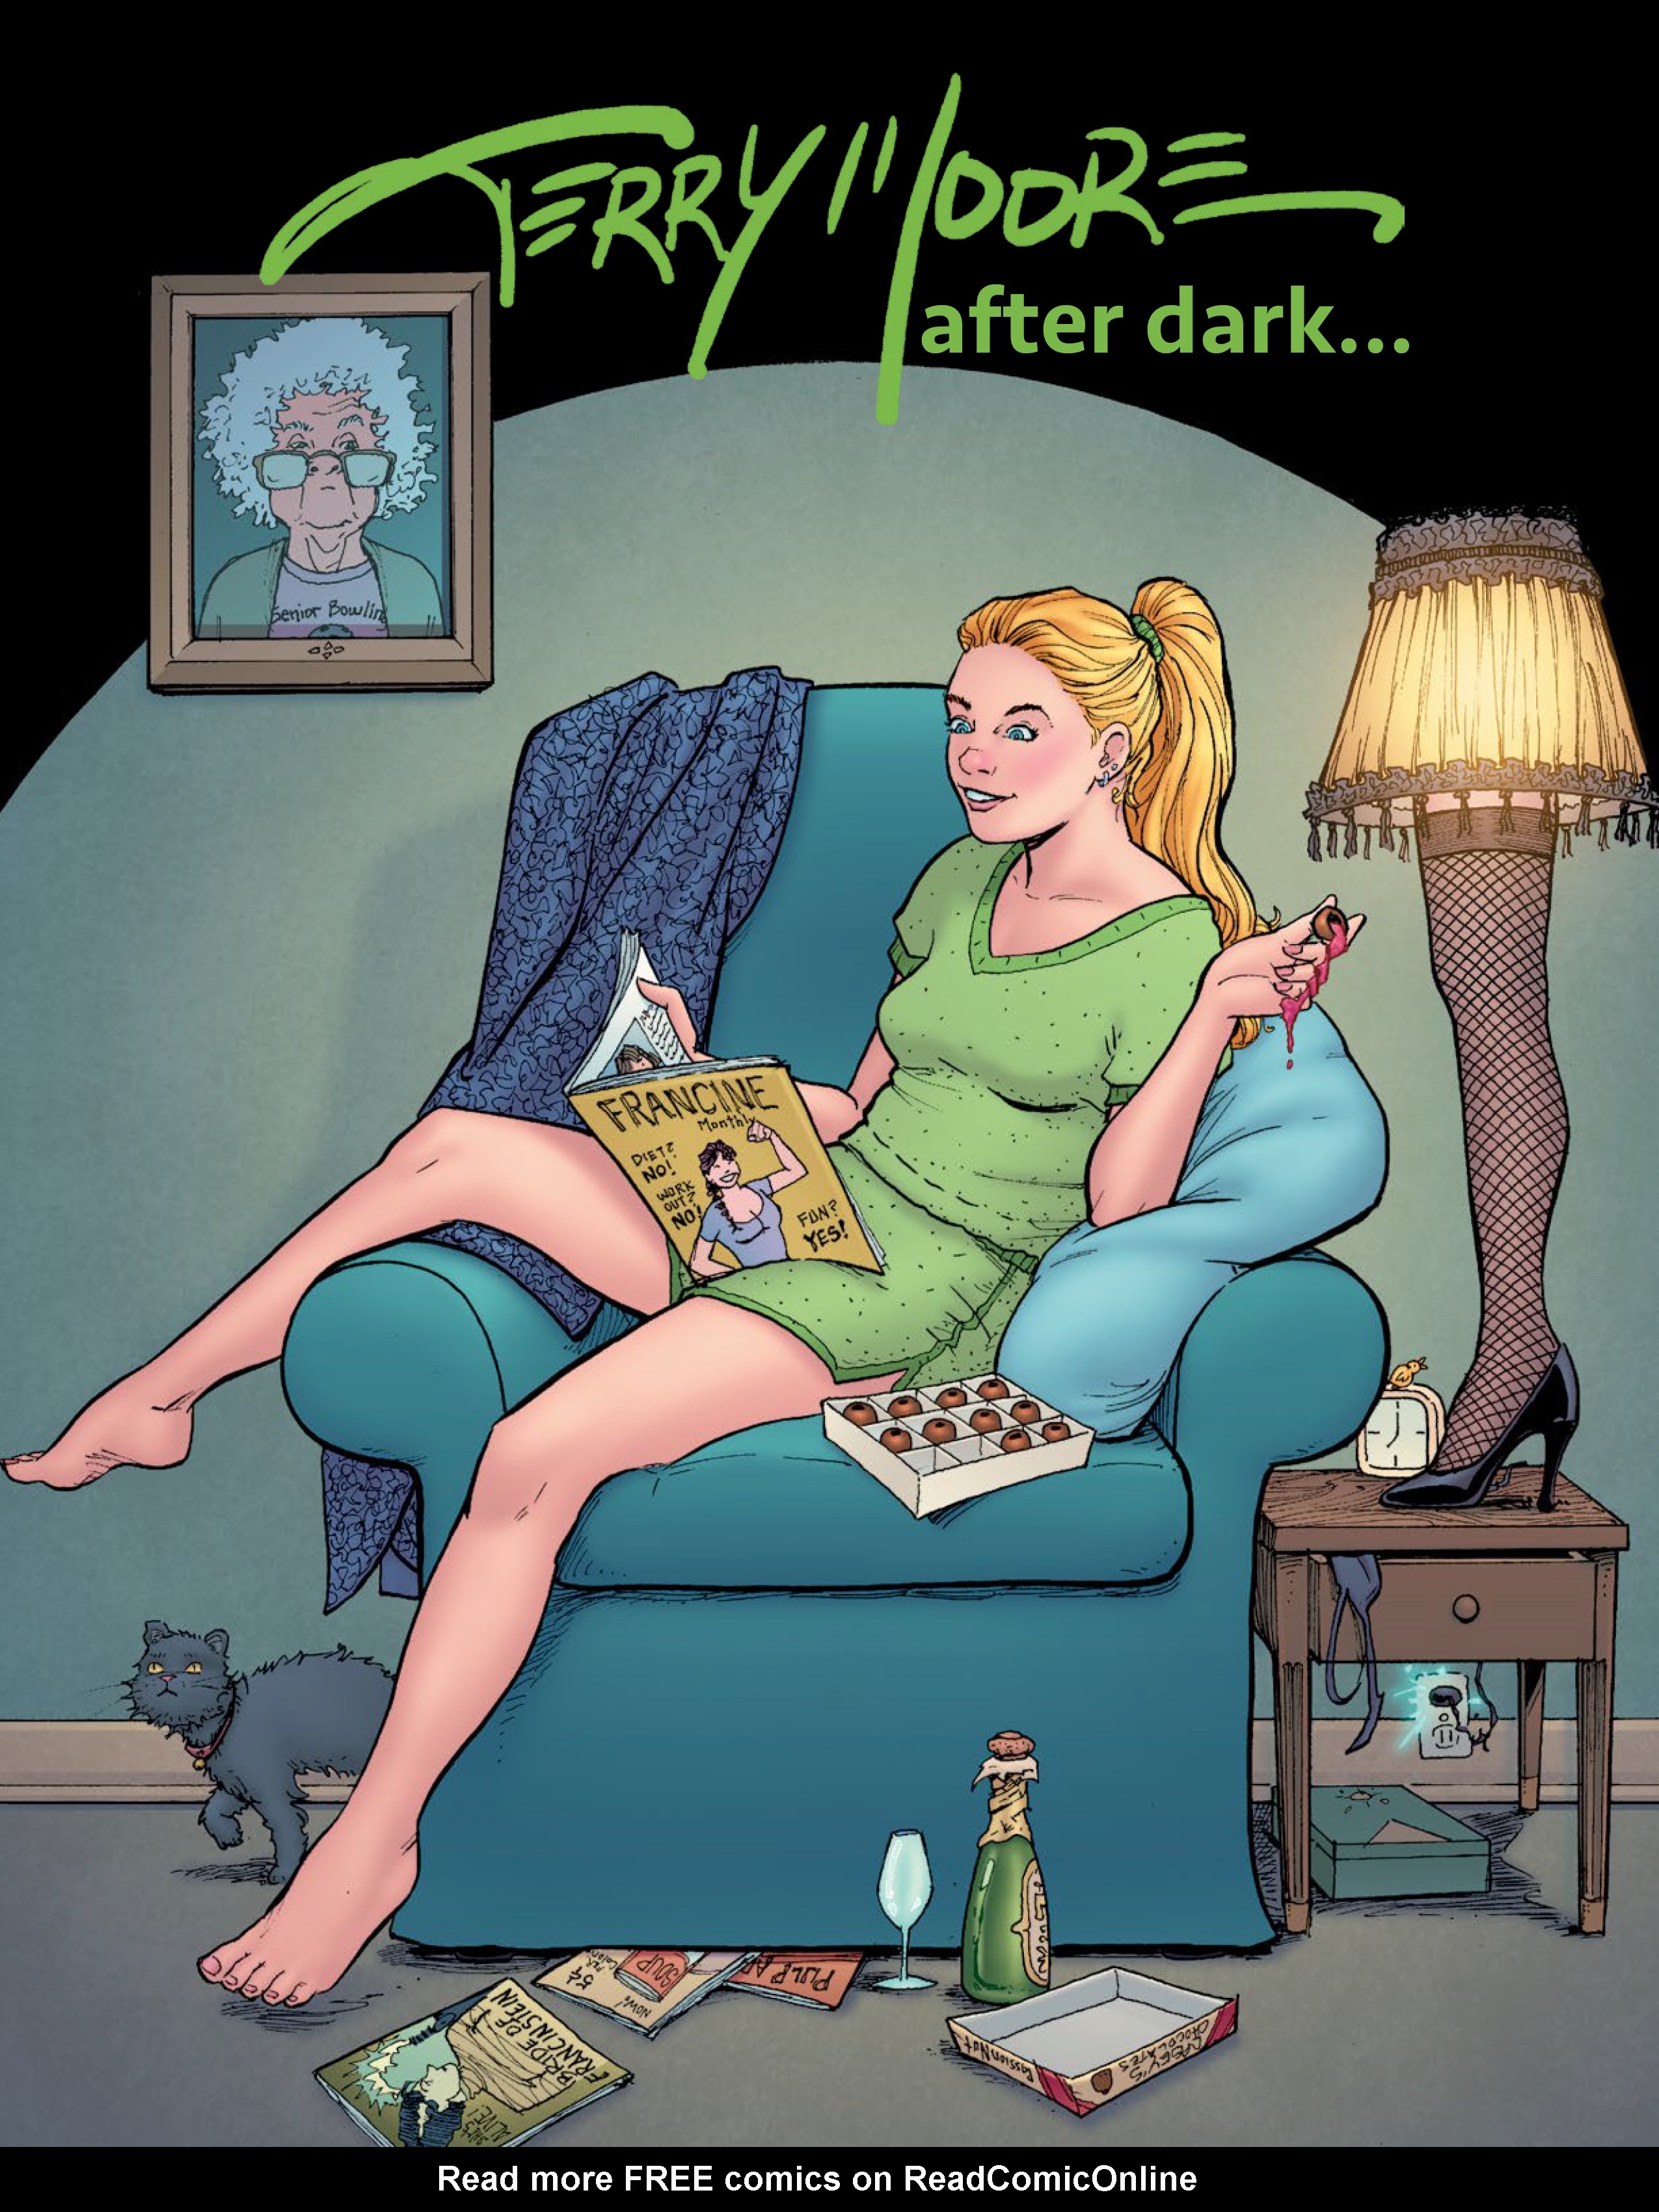 Read online Terry Moore after dark… comic -  Issue # TPB - 2